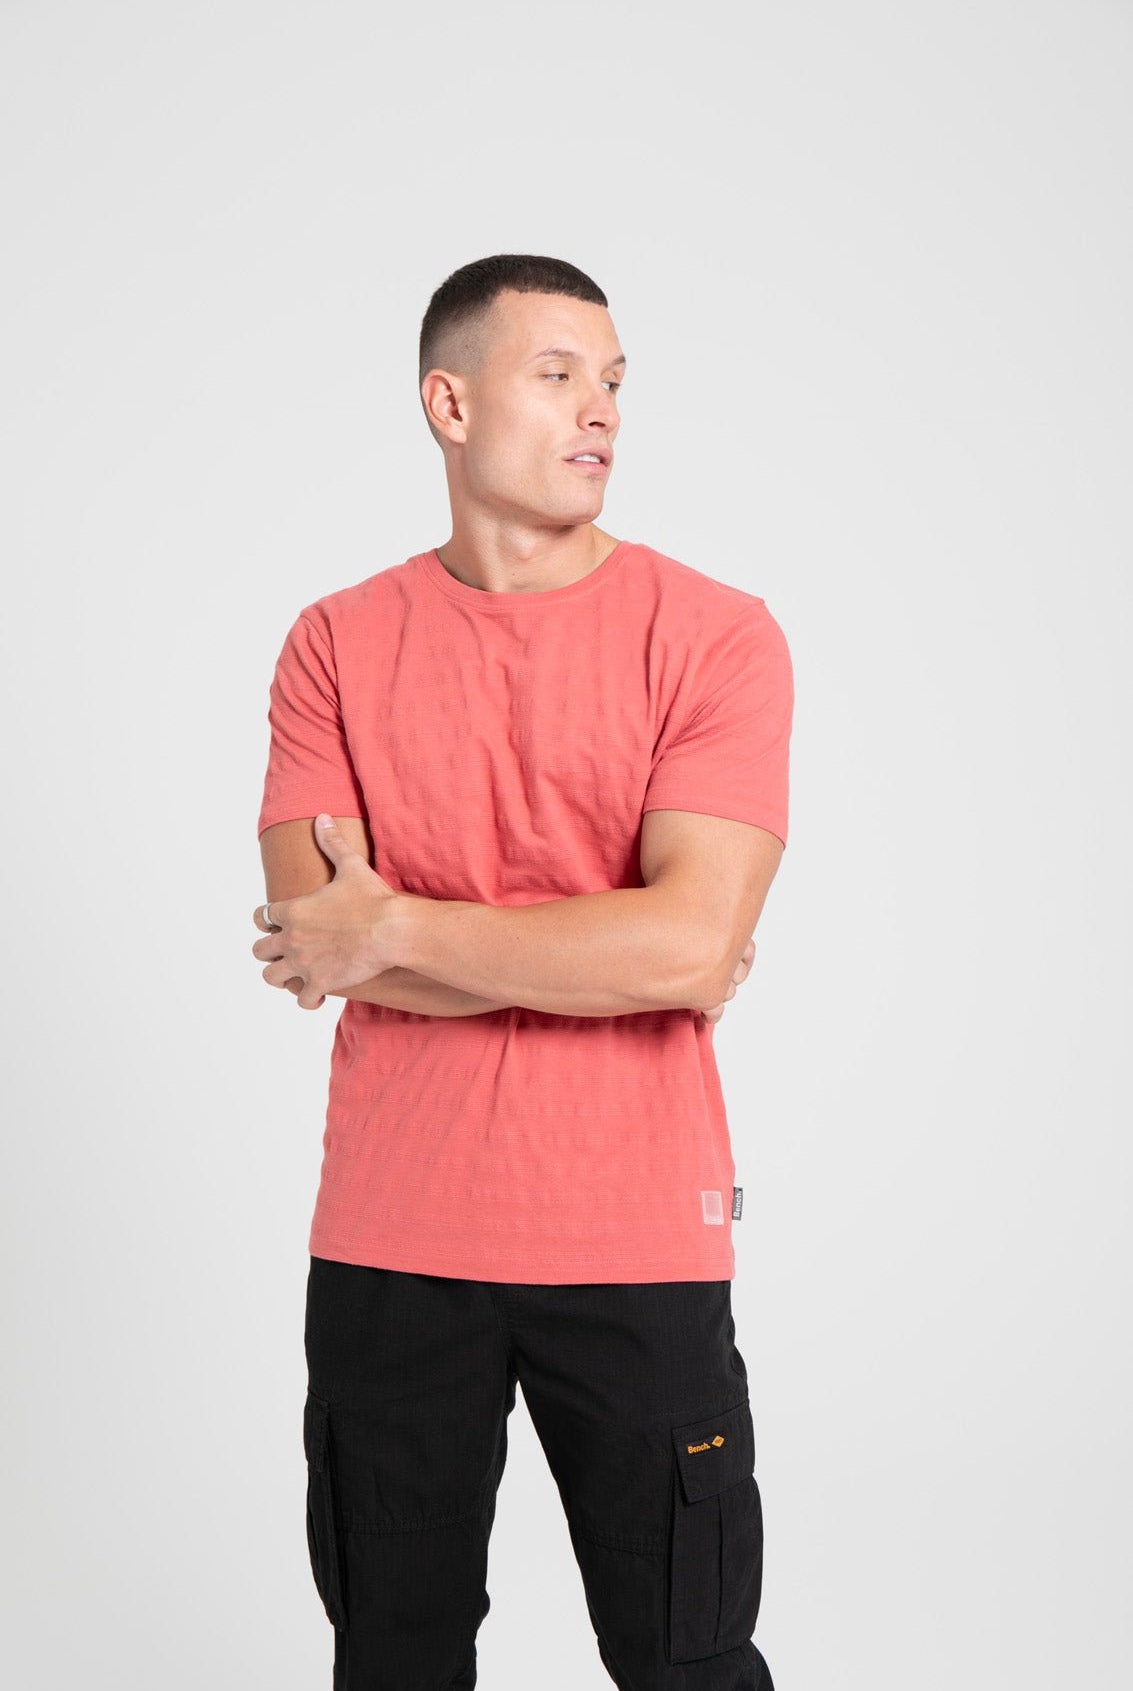 Mens 'SARRI' T-Shirt - WASHED OUT RED - Shop at www.Bench.co.uk #LoveMyHood